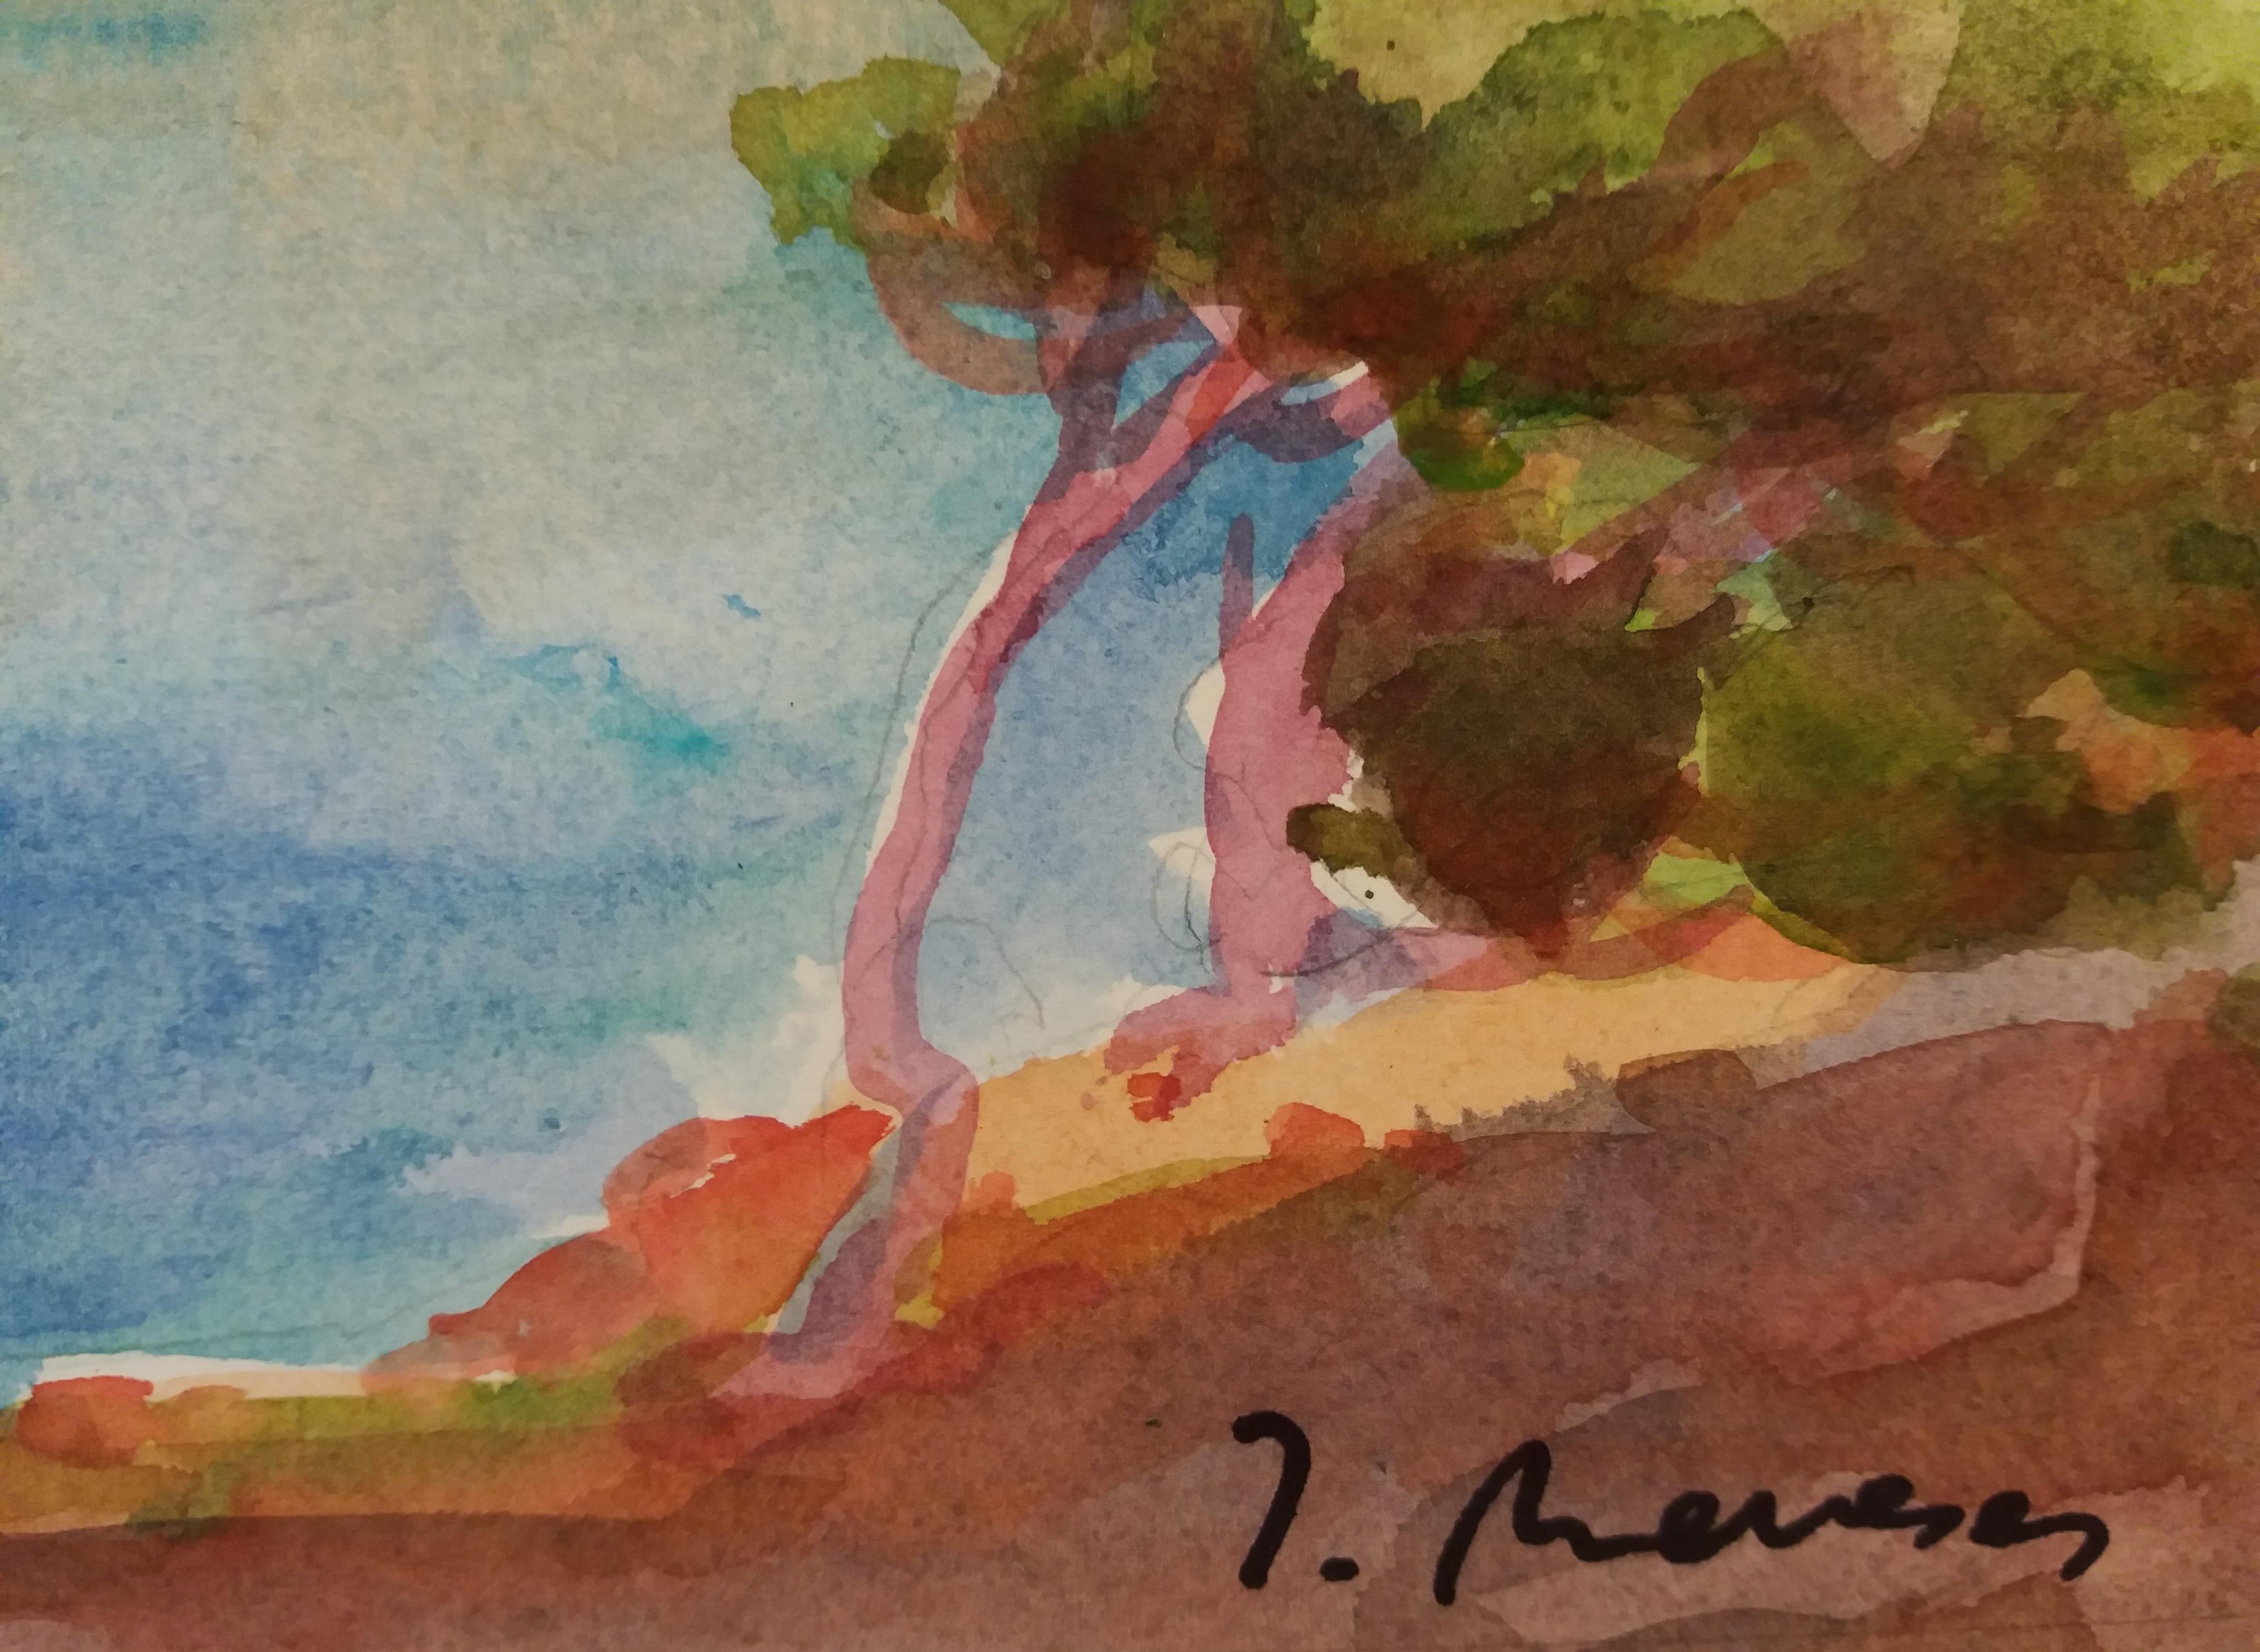 Meneses 30 coast. Marine. original watercolor paper expressionist  - Expressionist Painting by Josep Meneses